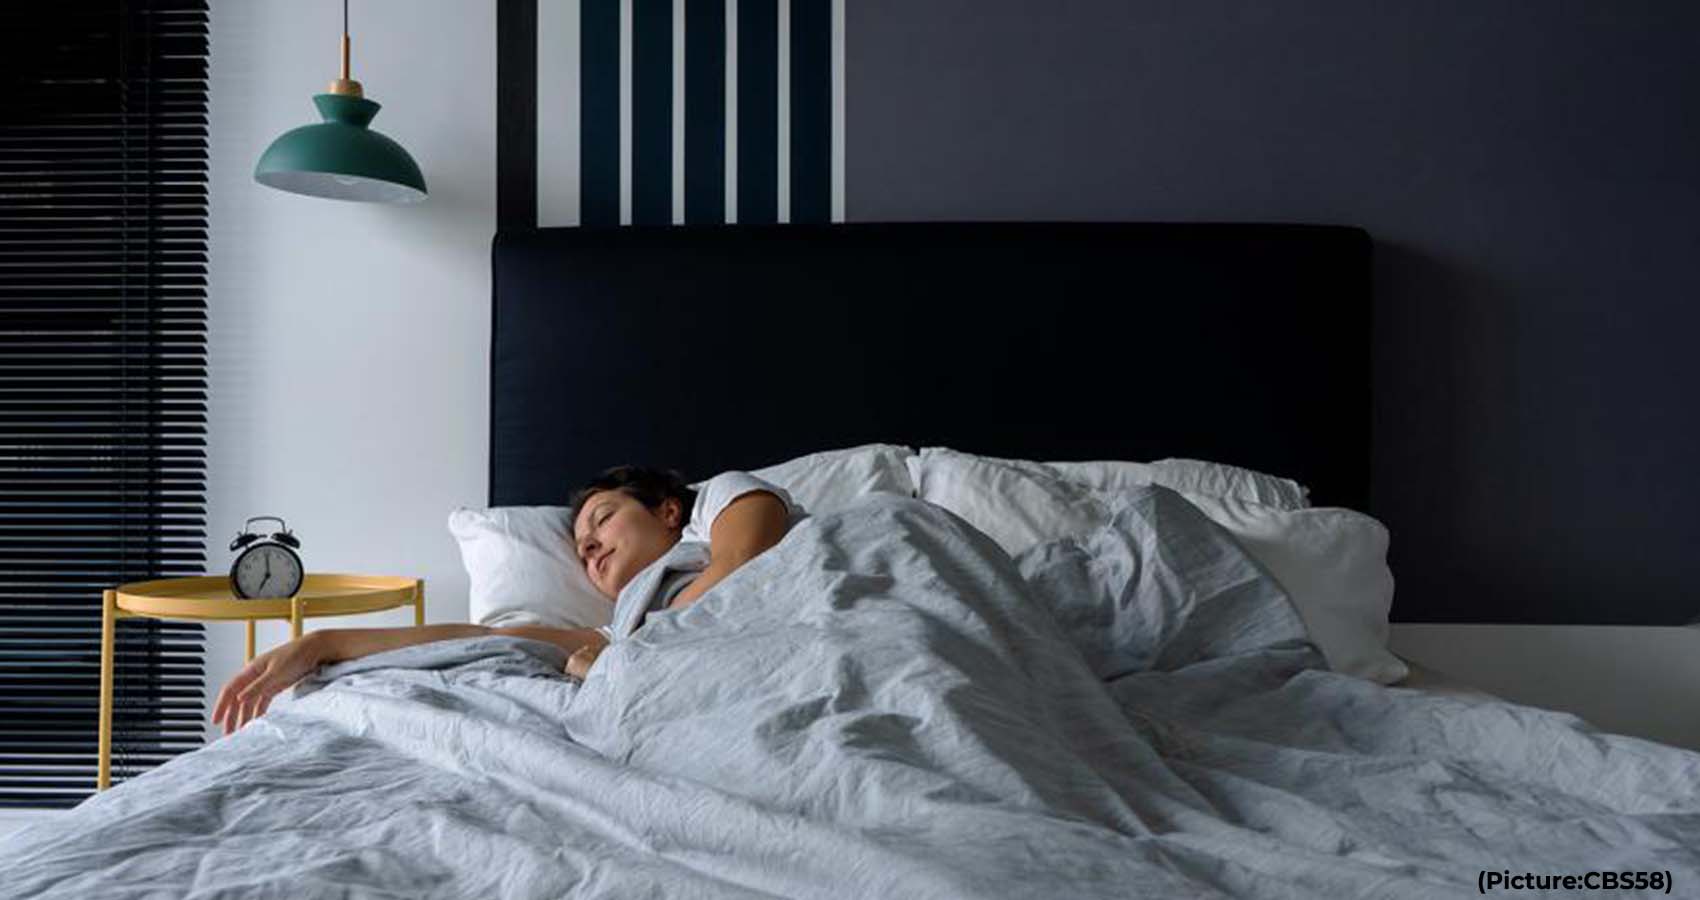 Sleeping With Even A Small Amount Of Light May Harm Your Health, Study Says